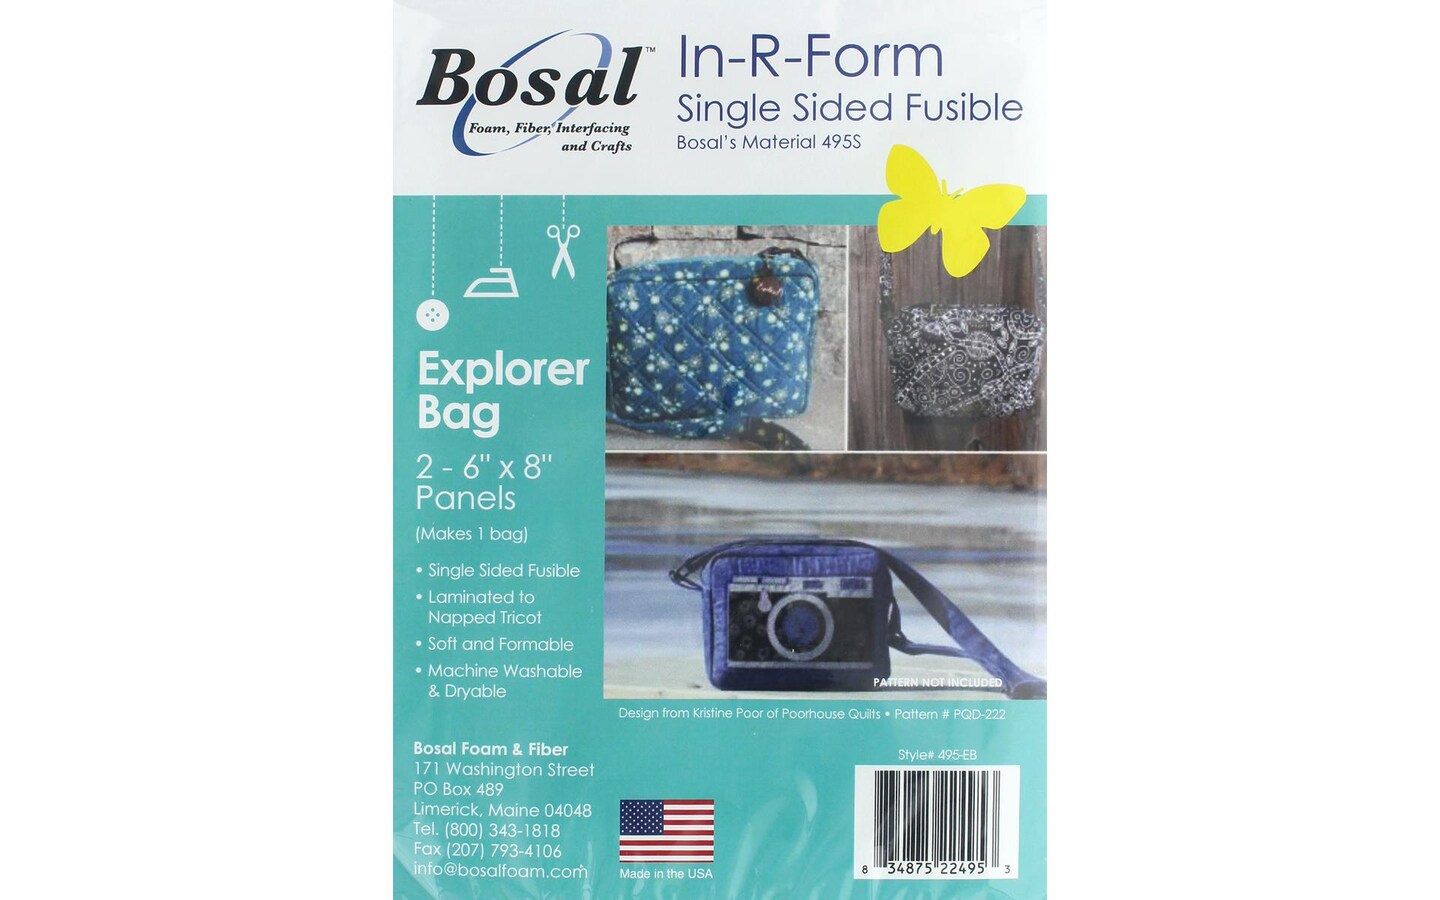 Bosal In-R-Form Single Sided Fusible Roundabout Bag – Green's Sewing and  Vacuum